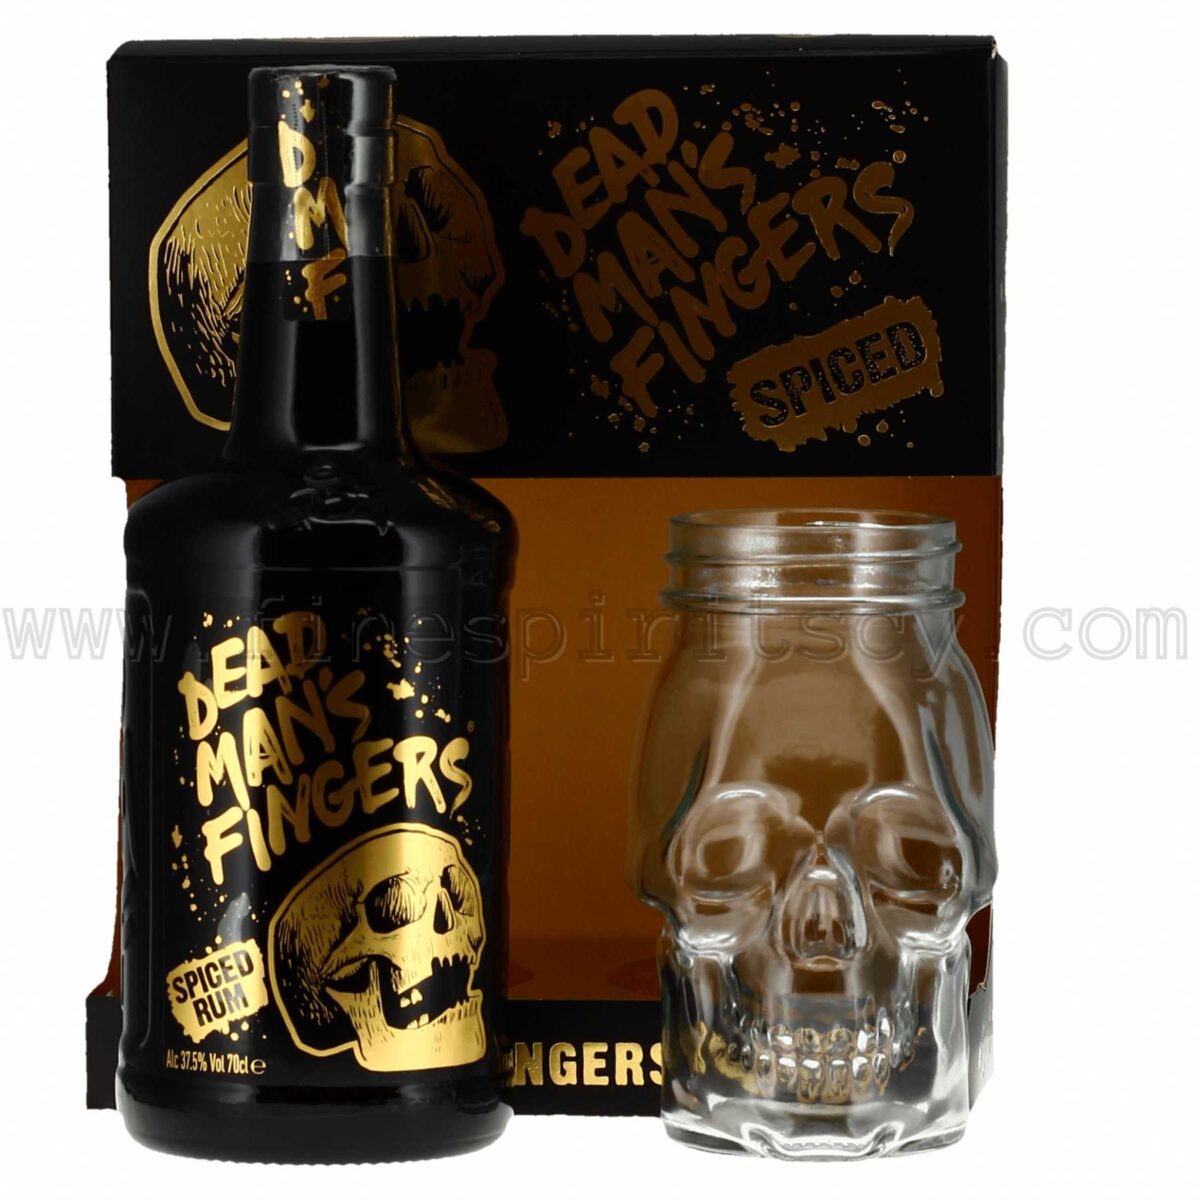 Dead Man's Fingers Spiced Rum With Skull Glass Gift Set